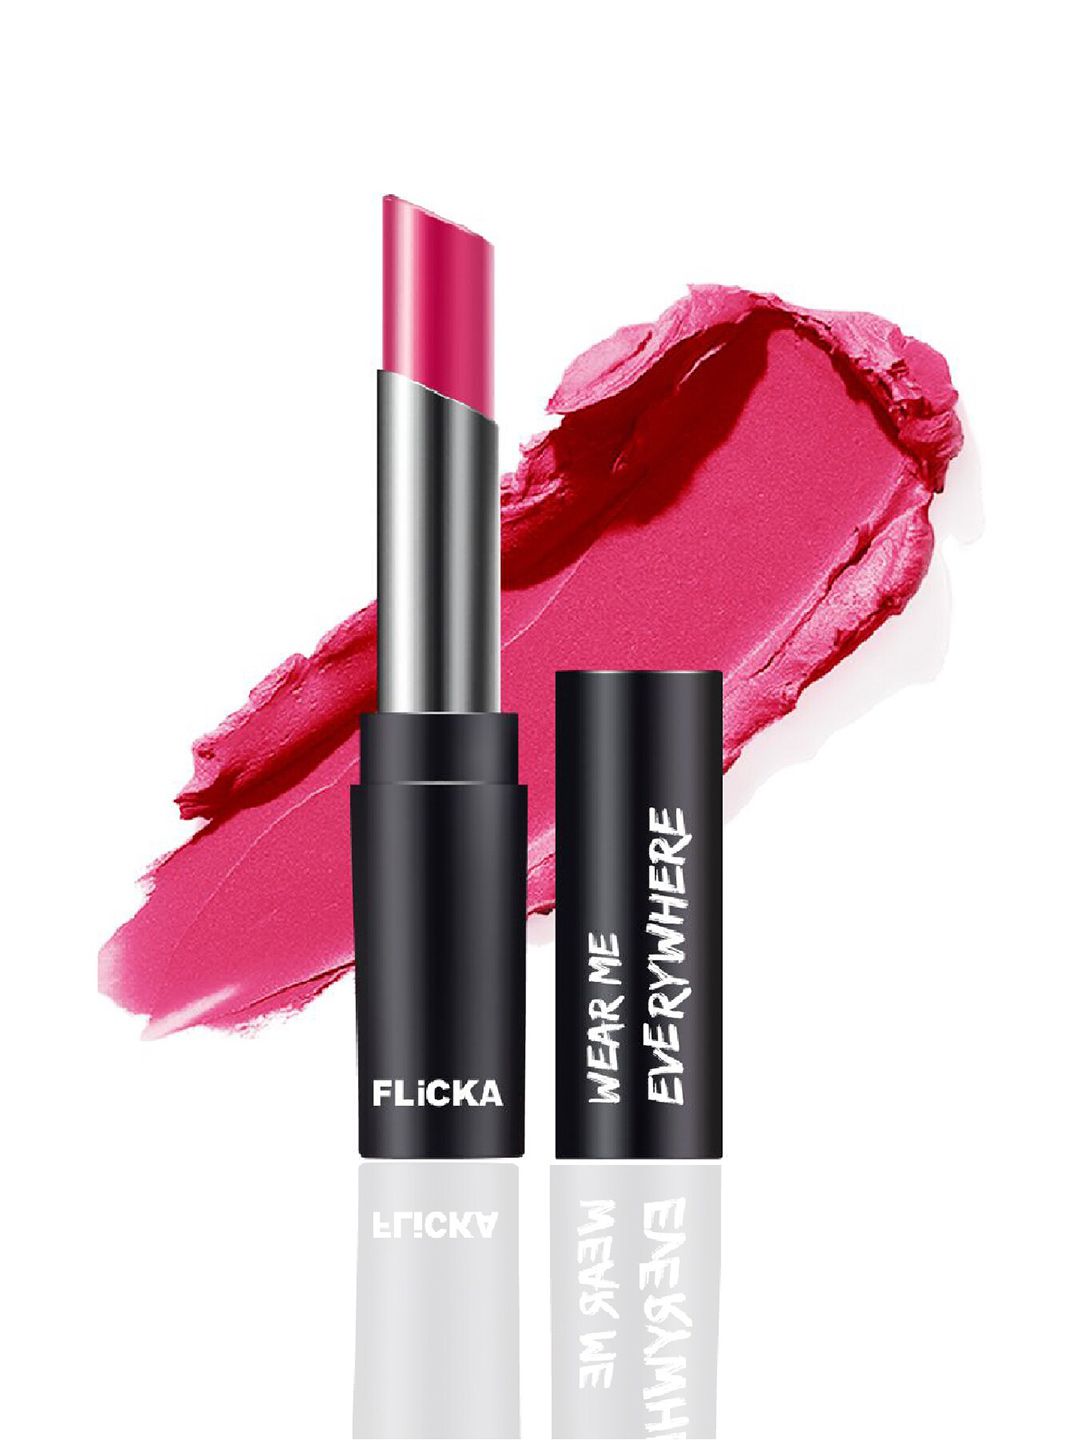 FLiCKA Wear Me Everywhere Creamy Matte Lipstick - Flirt With The Pink 16 Price in India